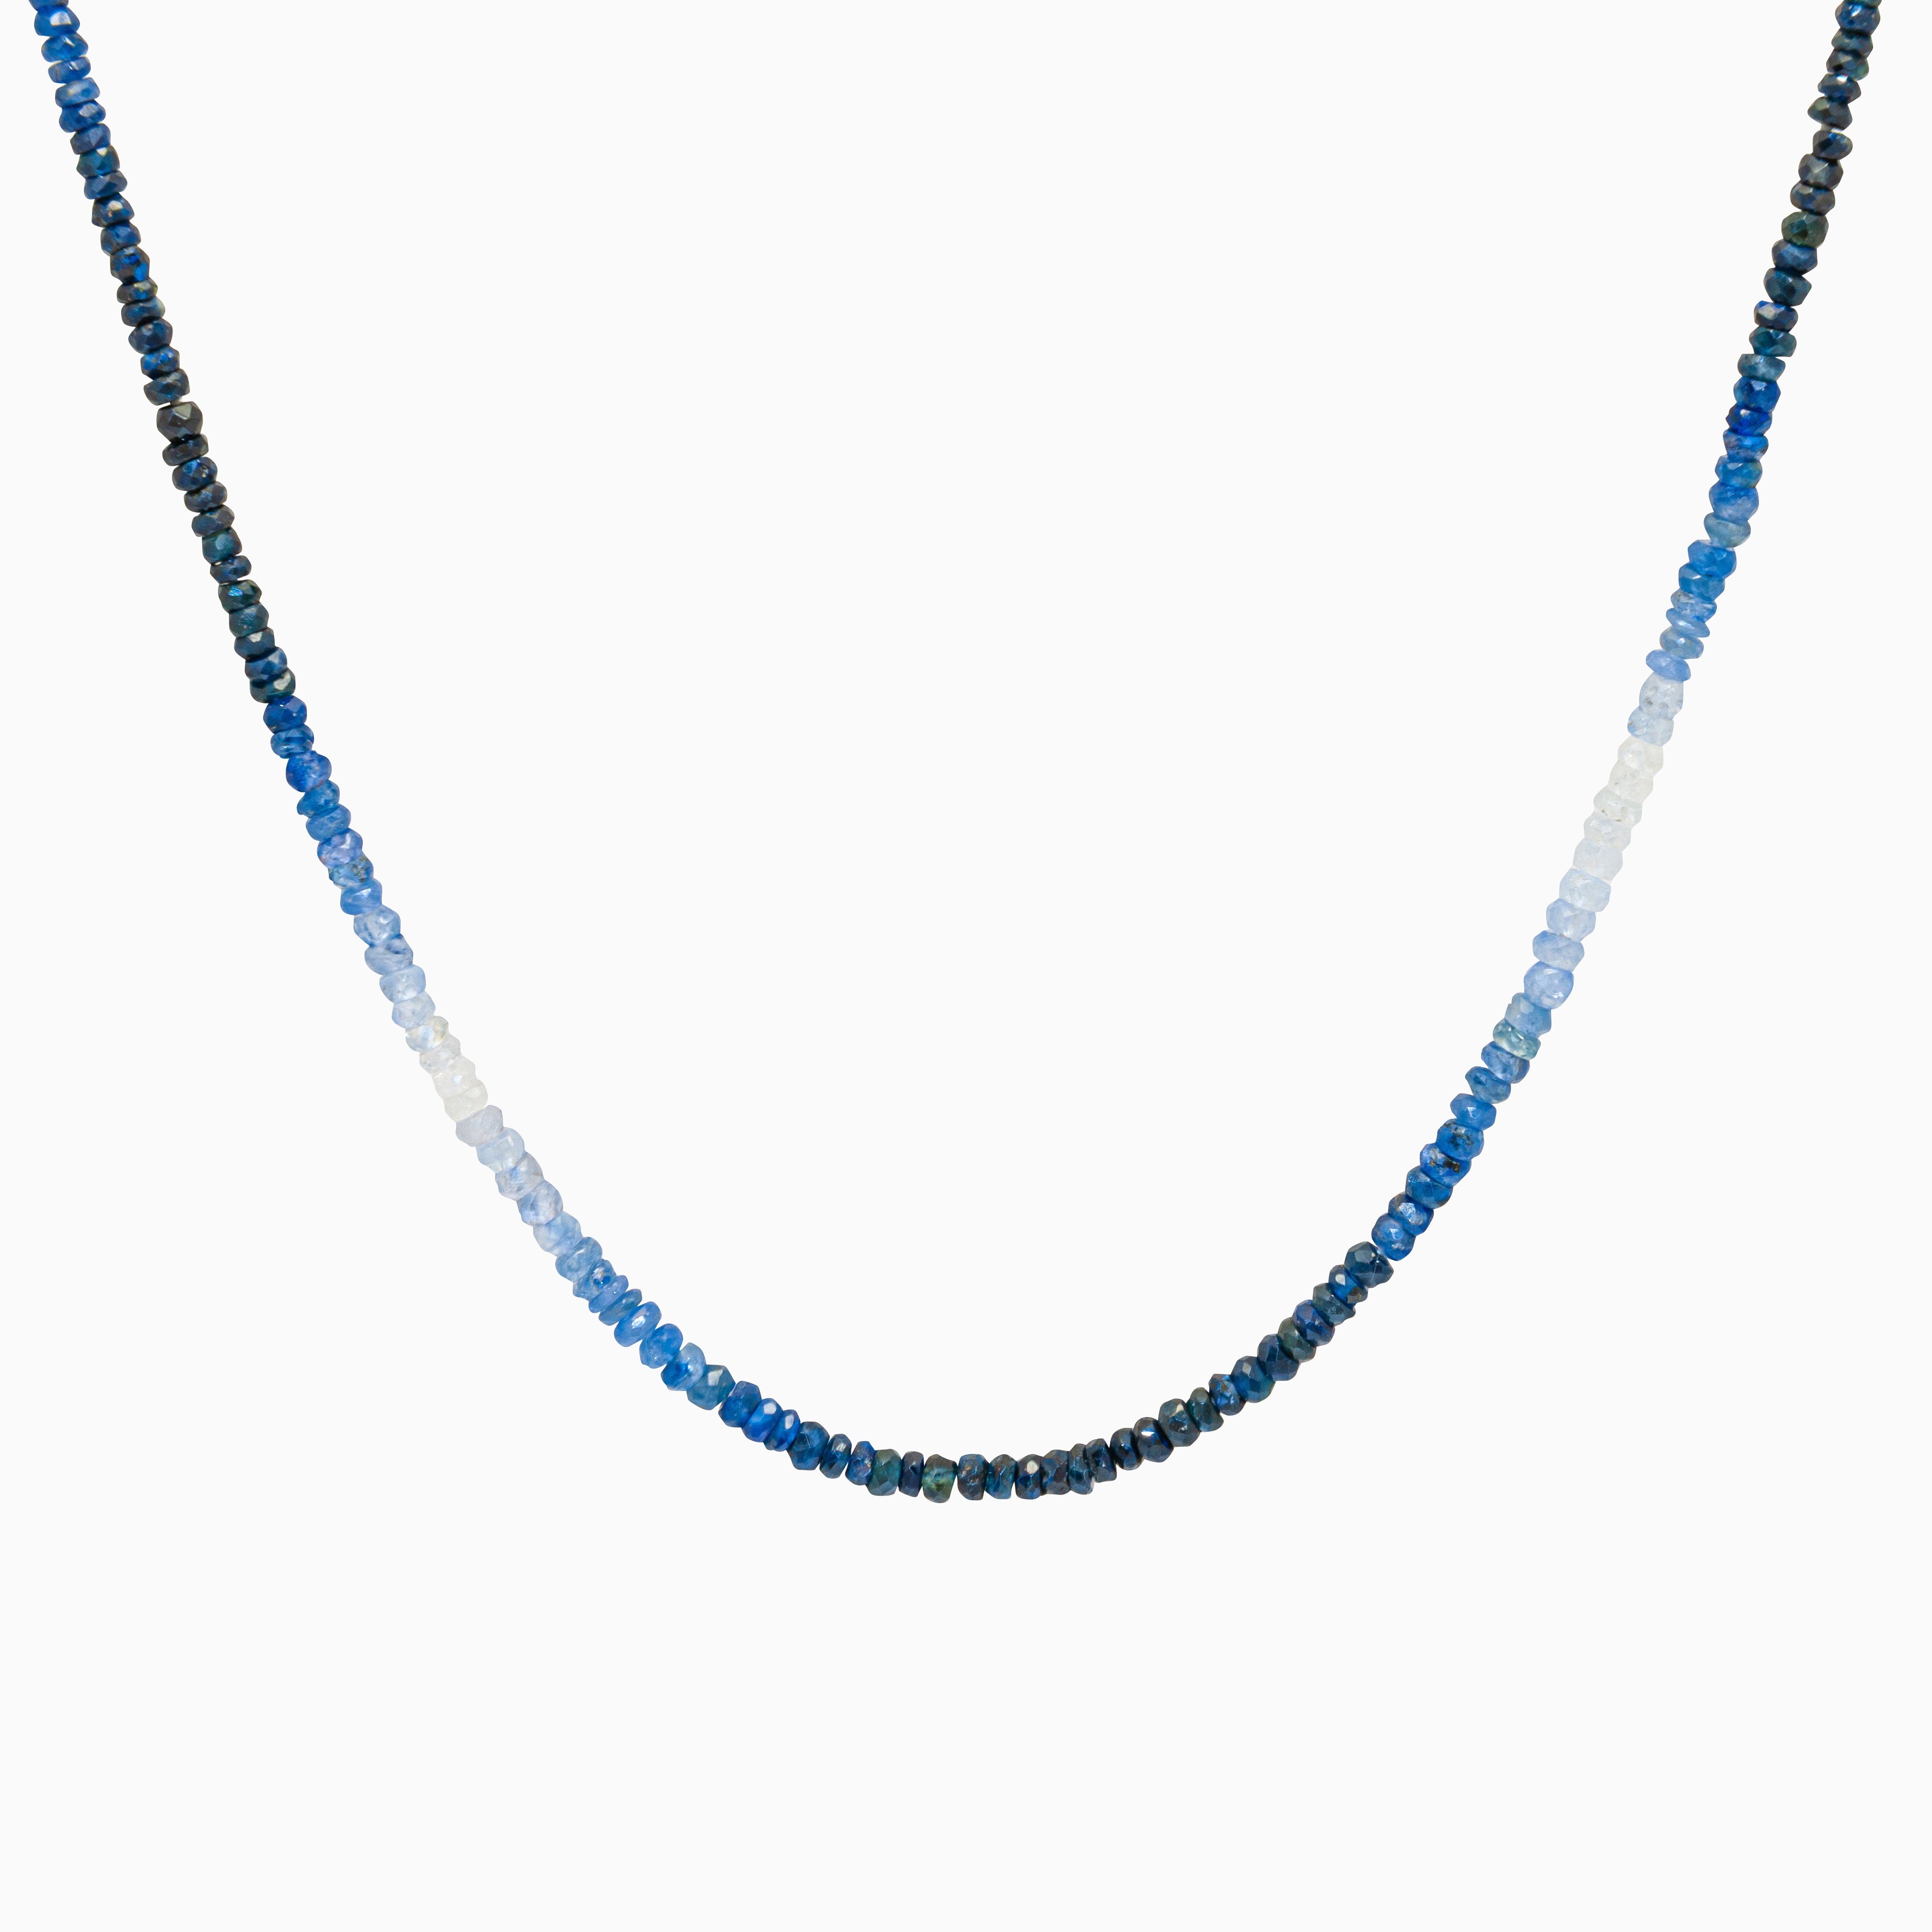 ASOS DESIGN choker necklace with faceted black bead design